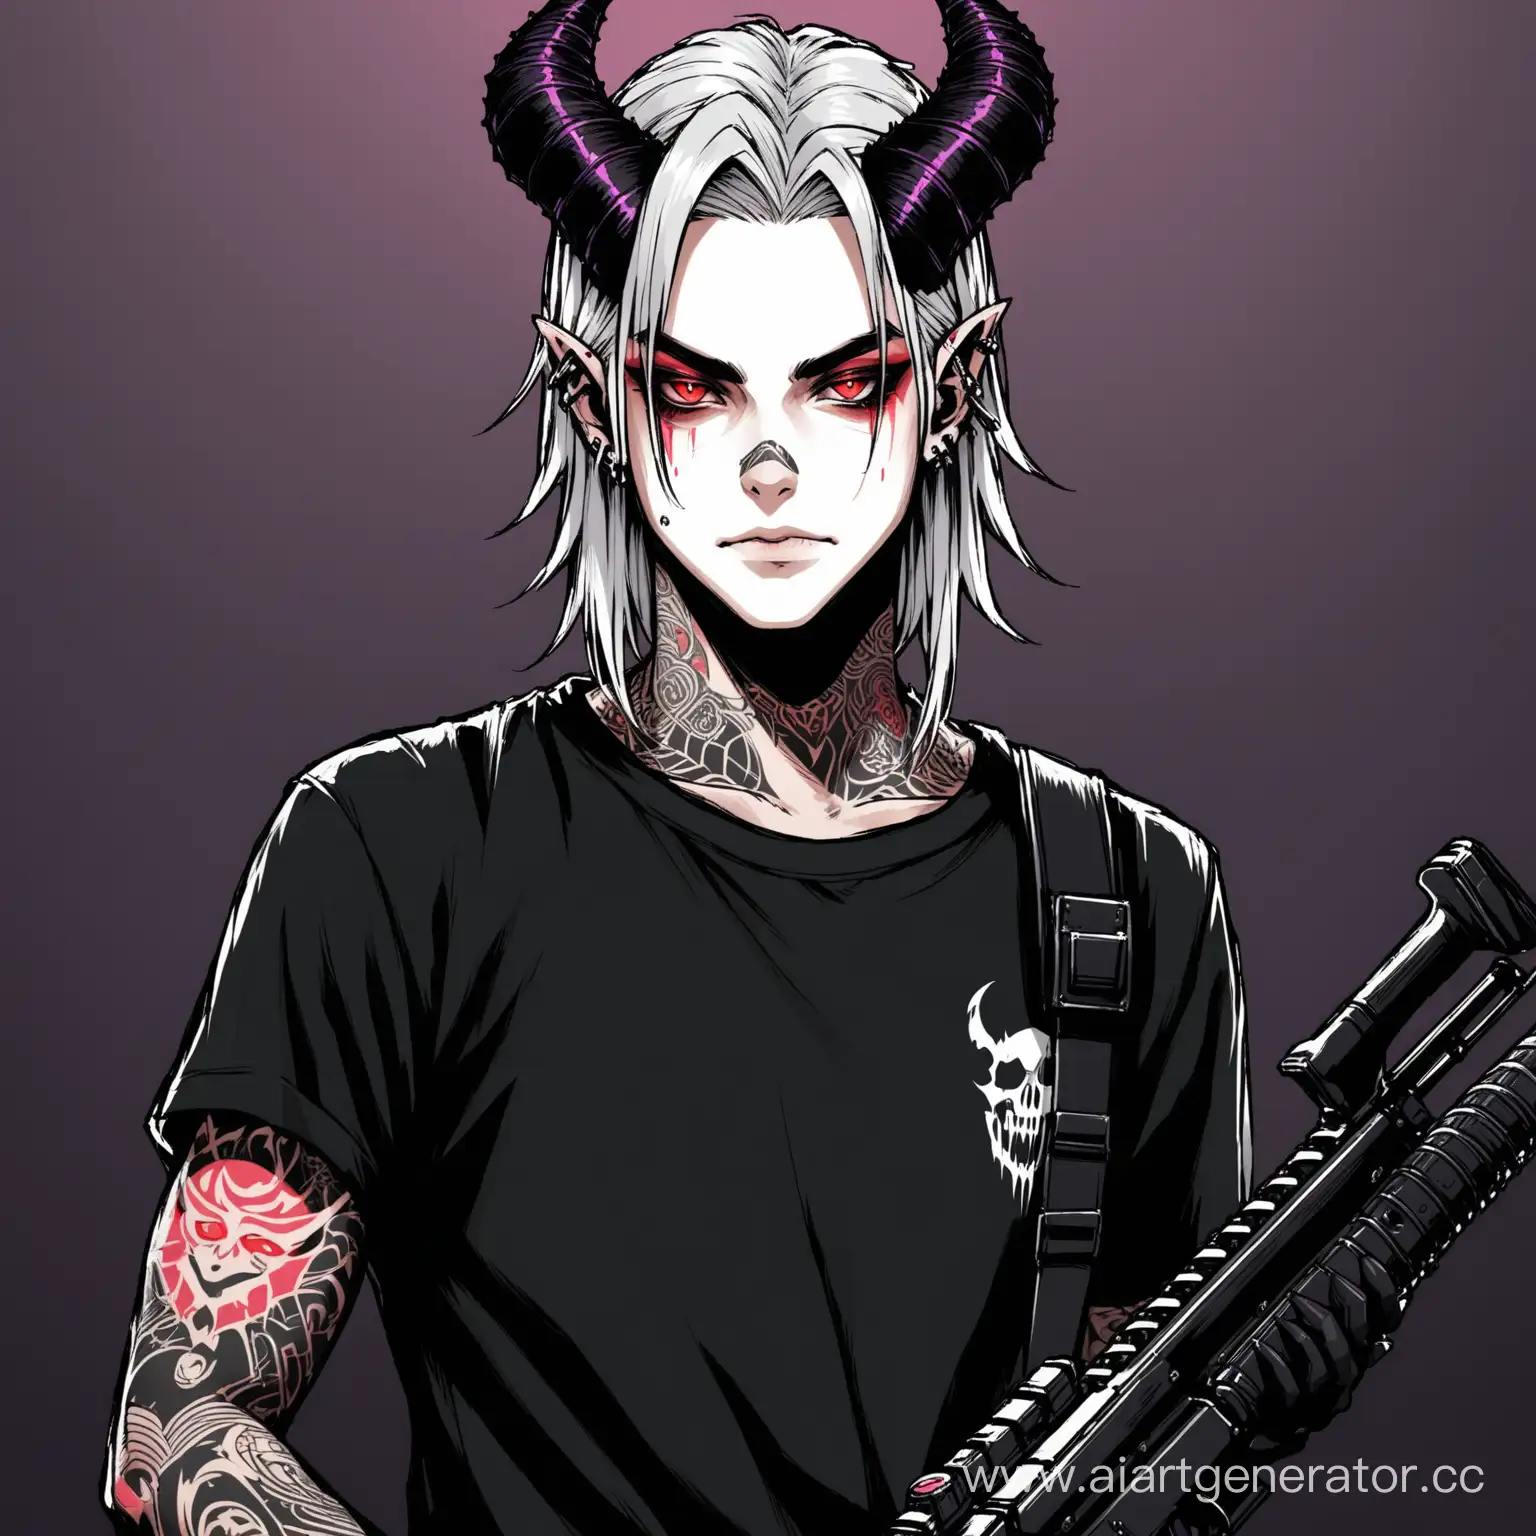 Cyberpunk-Warrior-with-Maleficent-Horns-and-Tattoos